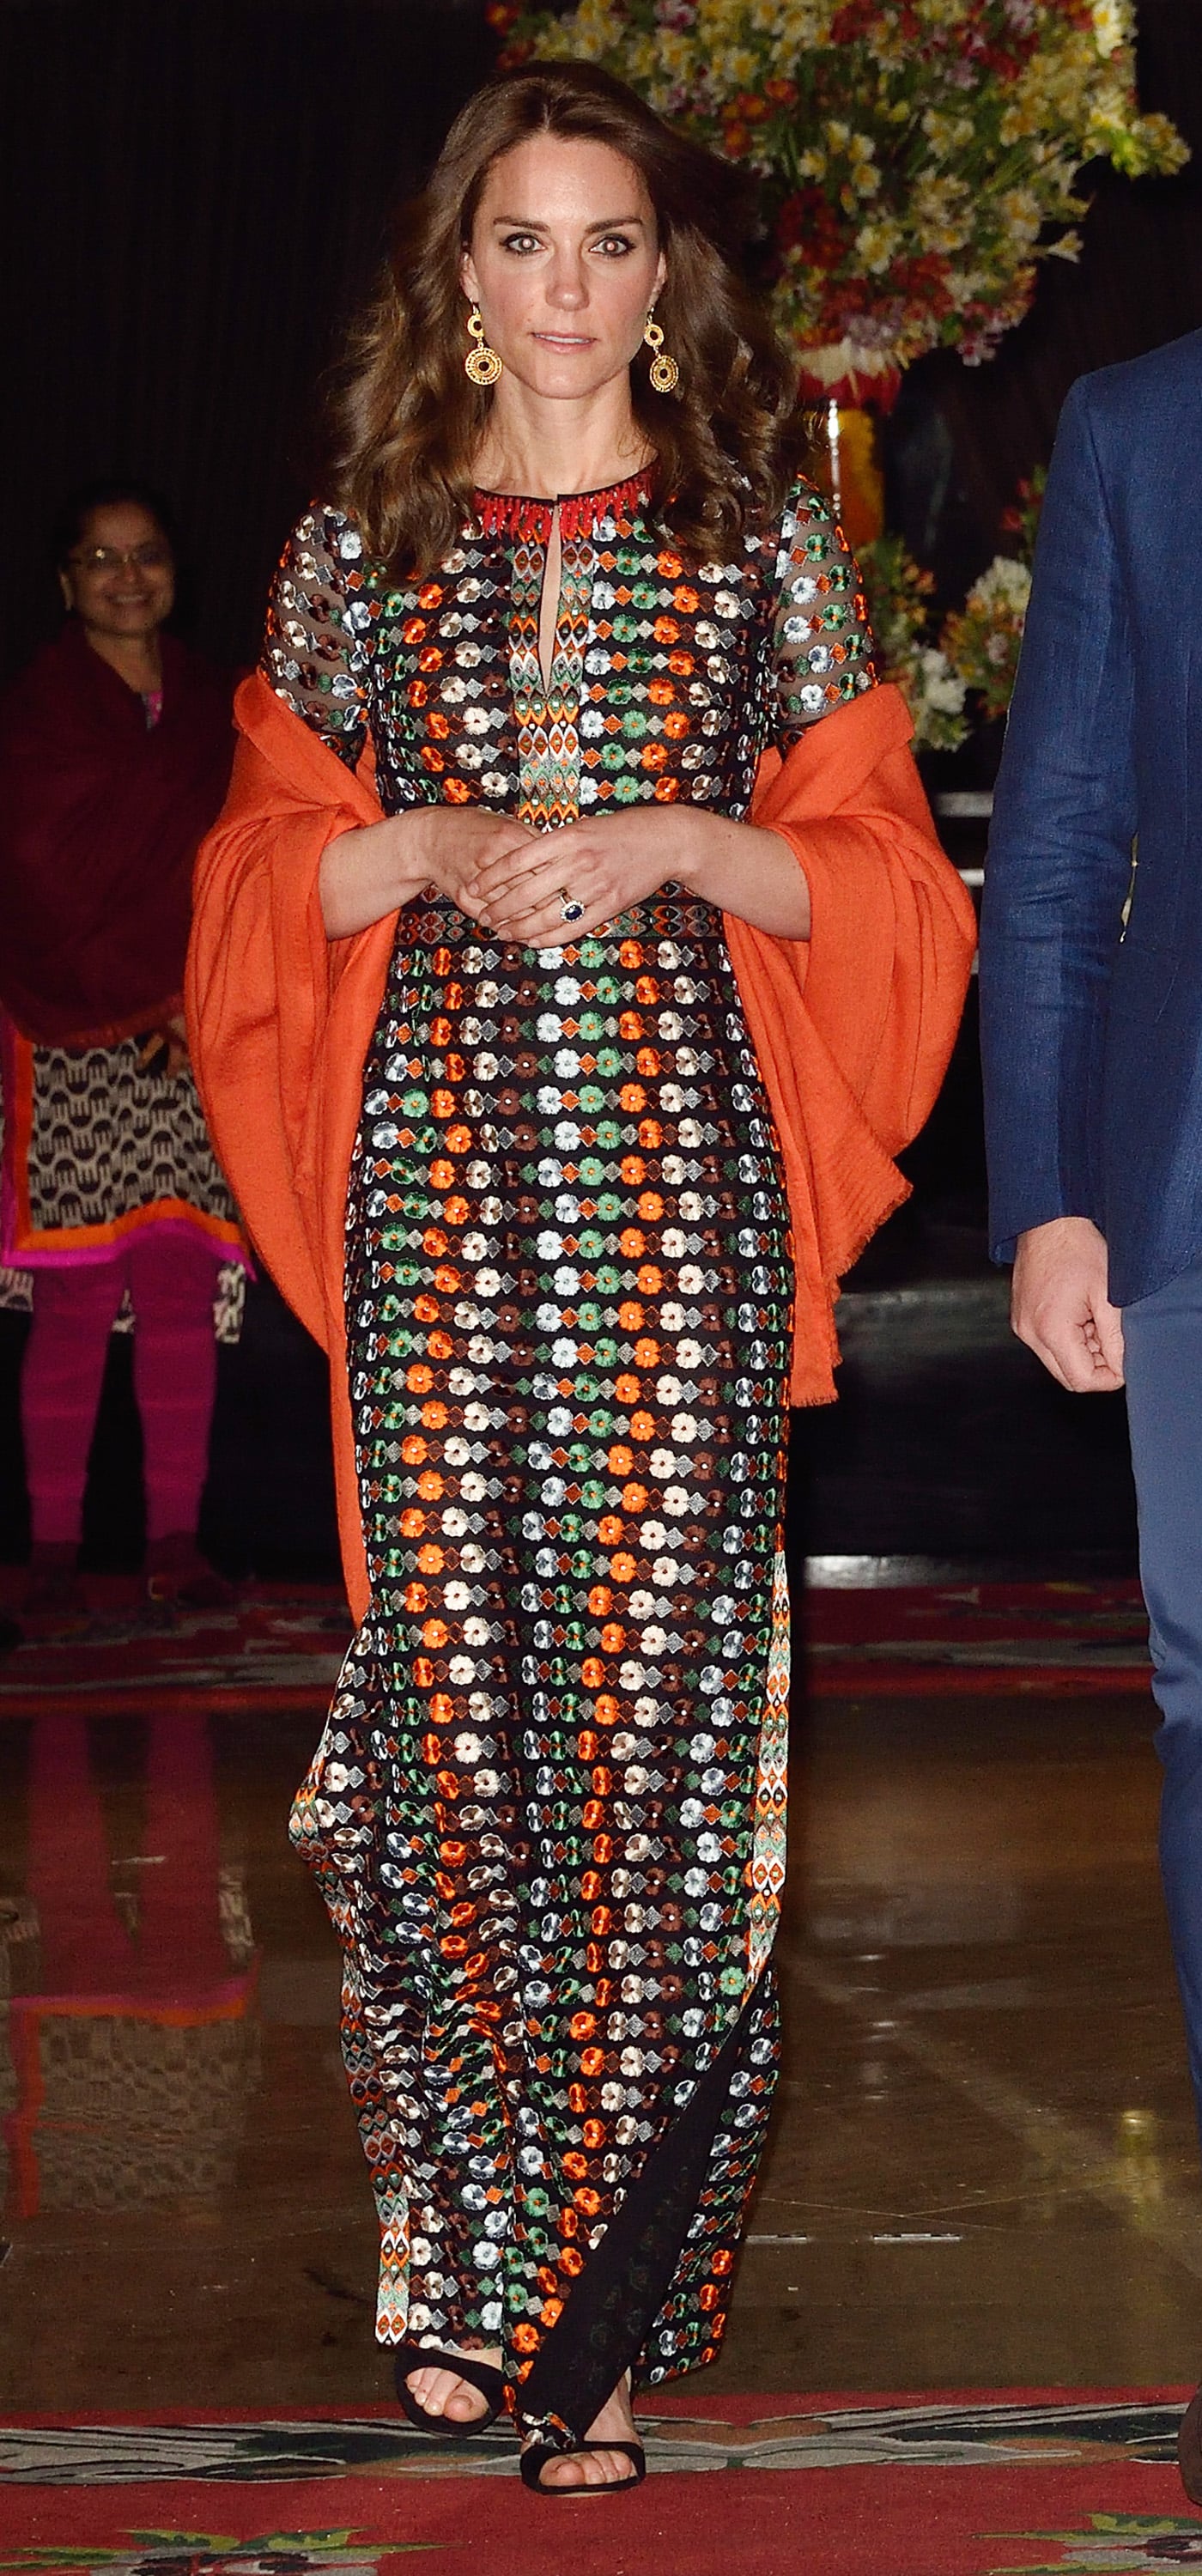 Drew Barrymore and Kate Middleton in Tory Burch Gown | POPSUGAR Fashion